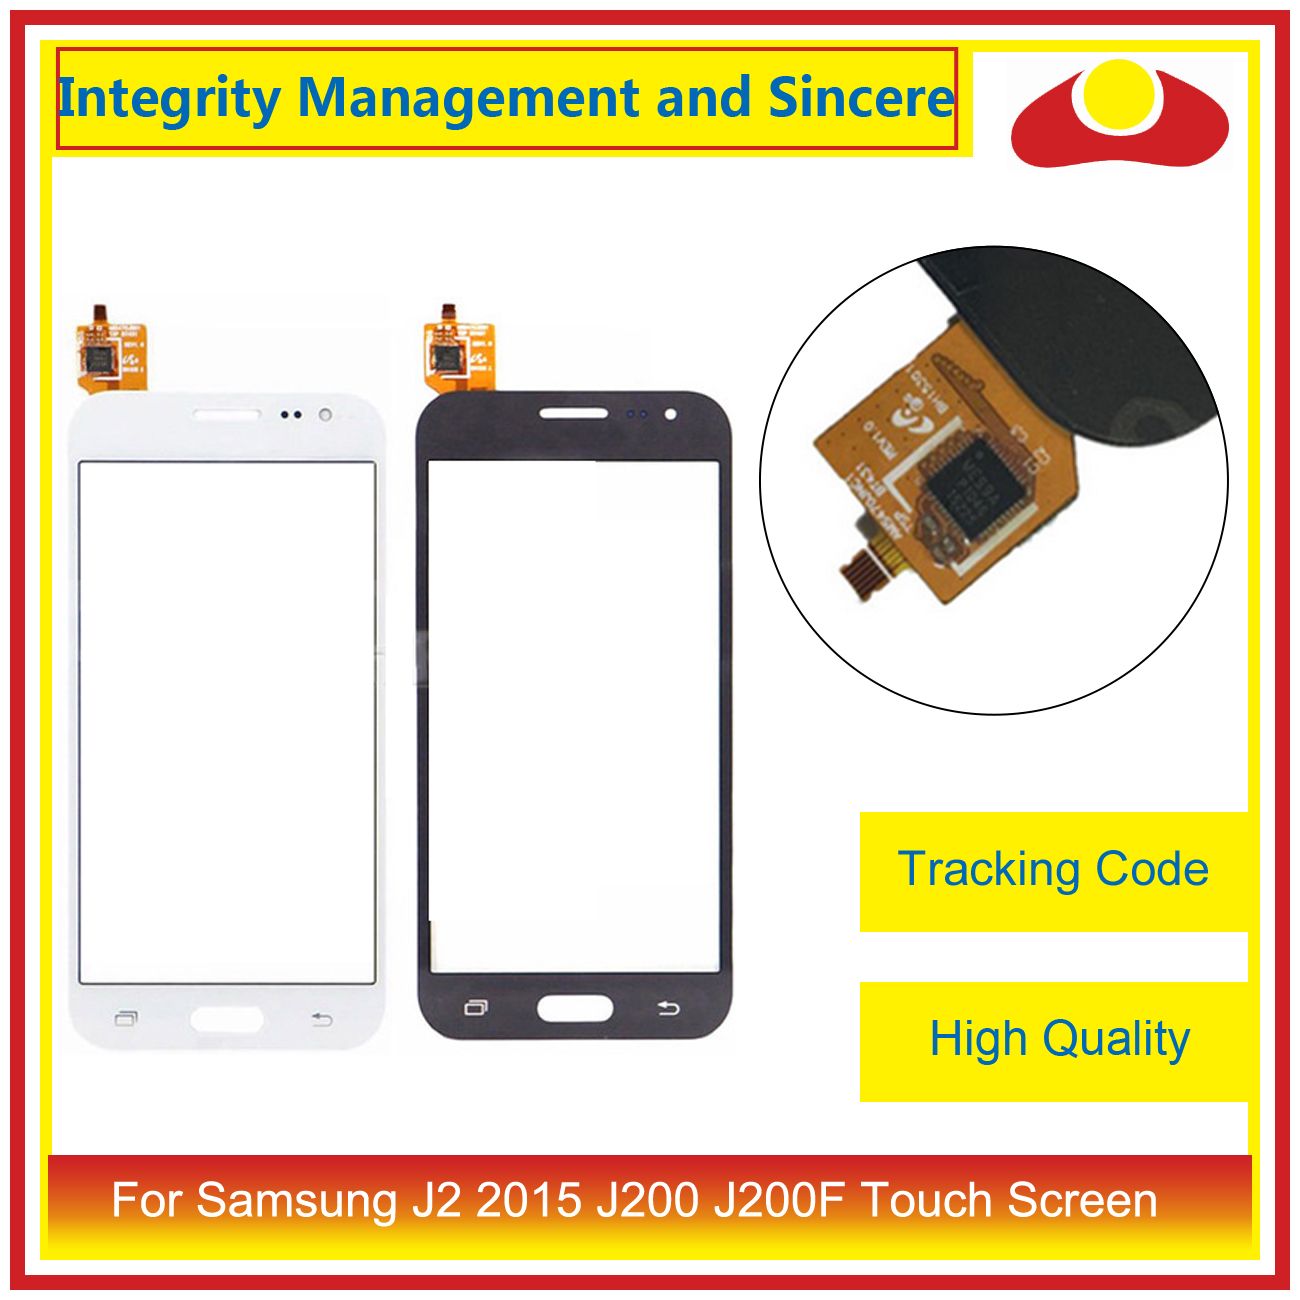 21 For Samsung Galaxy Duos J2 15 J0 J0f Touch Screen Digitizer Sensor Outer Glass Lens Panel Black White Gold From Rebecca17 3 2 Dhgate Com